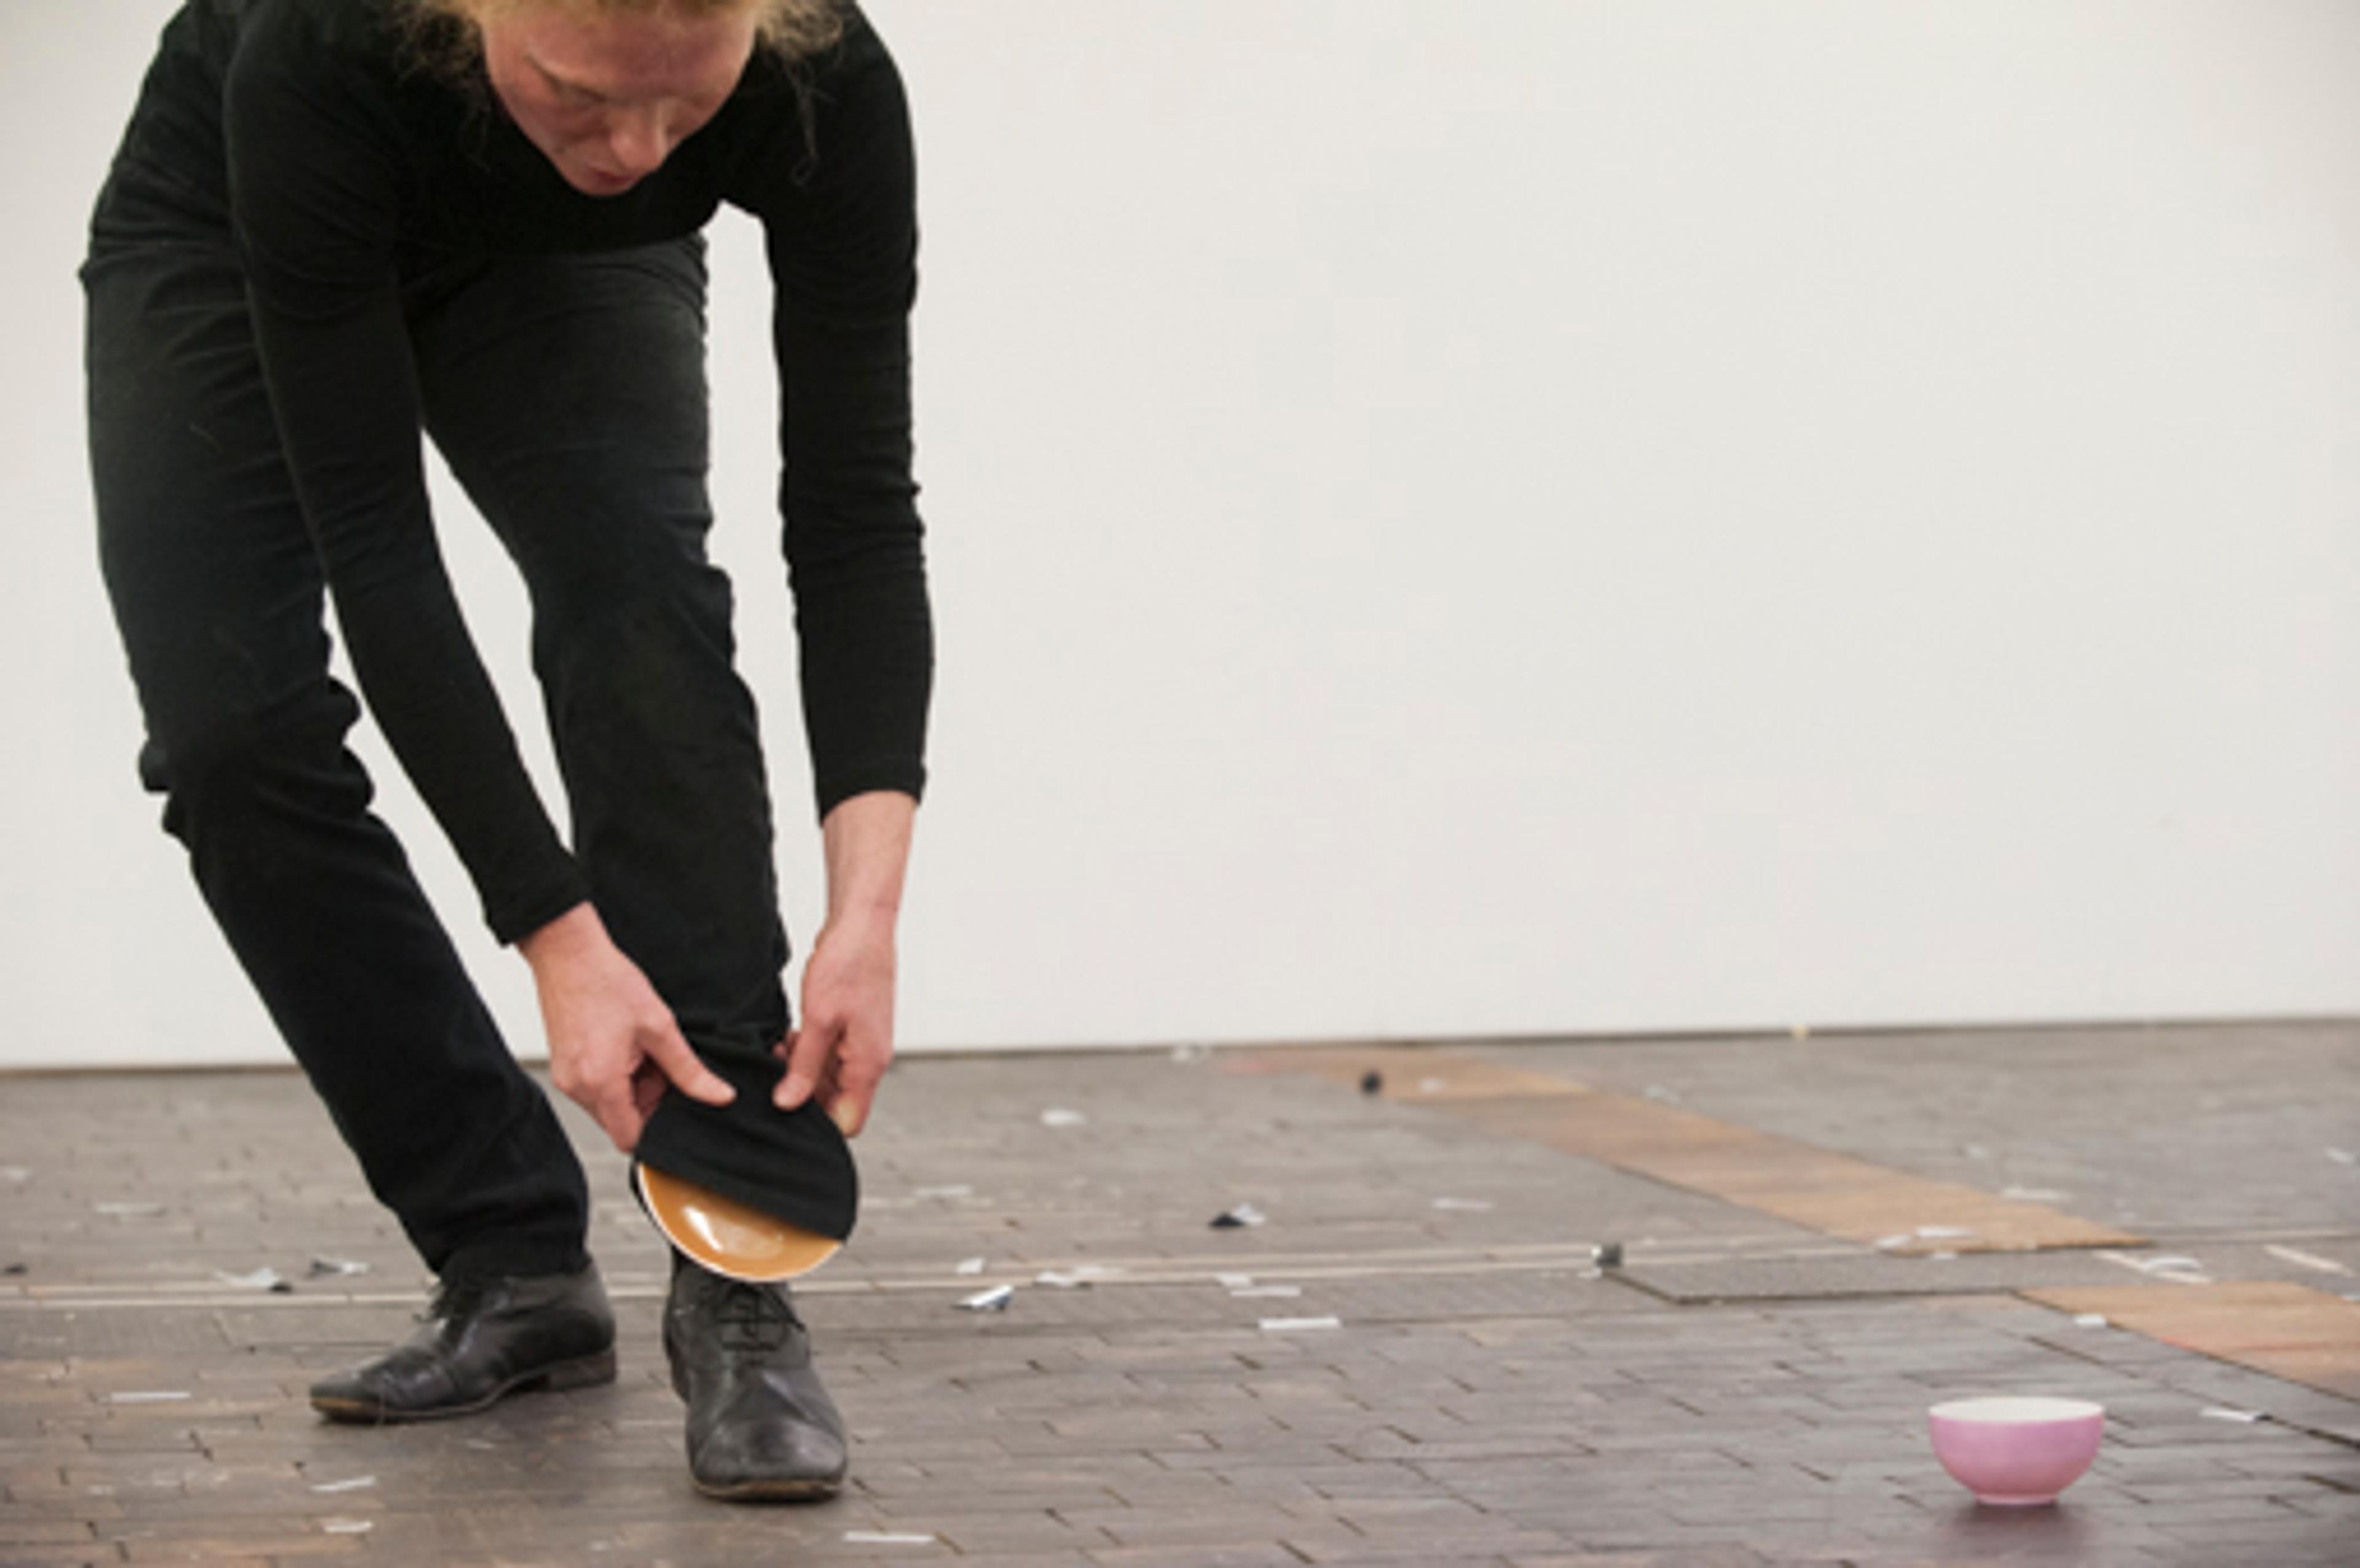 Gisela Hochuli, «In Touch with M.O. – eine Auslese», 2014 / Photo credit: Swiss Performance Art Award 2014